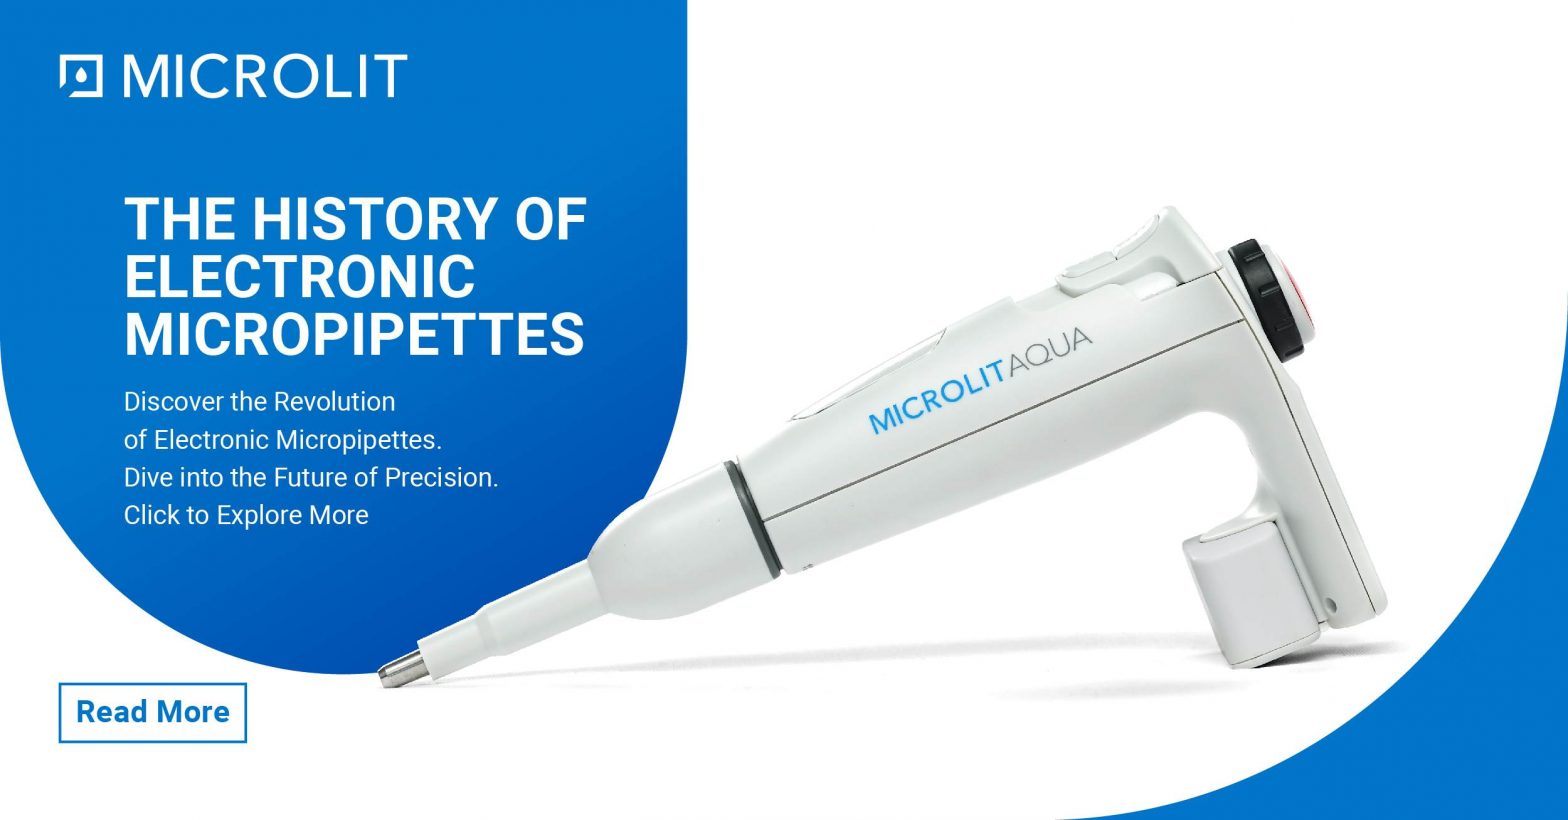 The History of Electronic Micropipettes